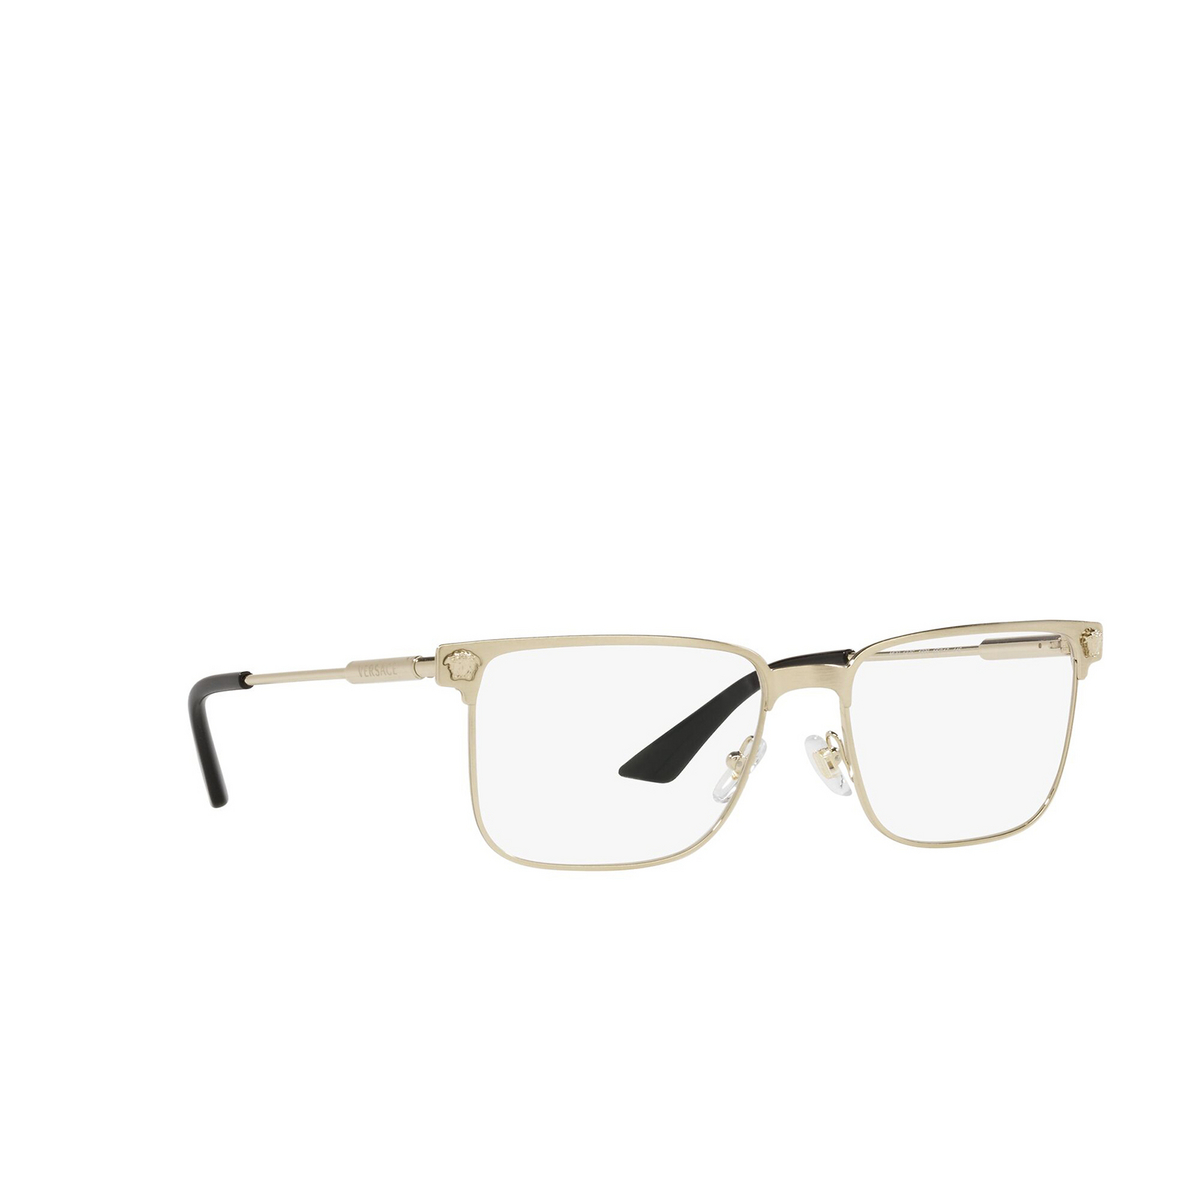 Versace VE1276 Eyeglasses 1339 Brushed Pale Gold - three-quarters view